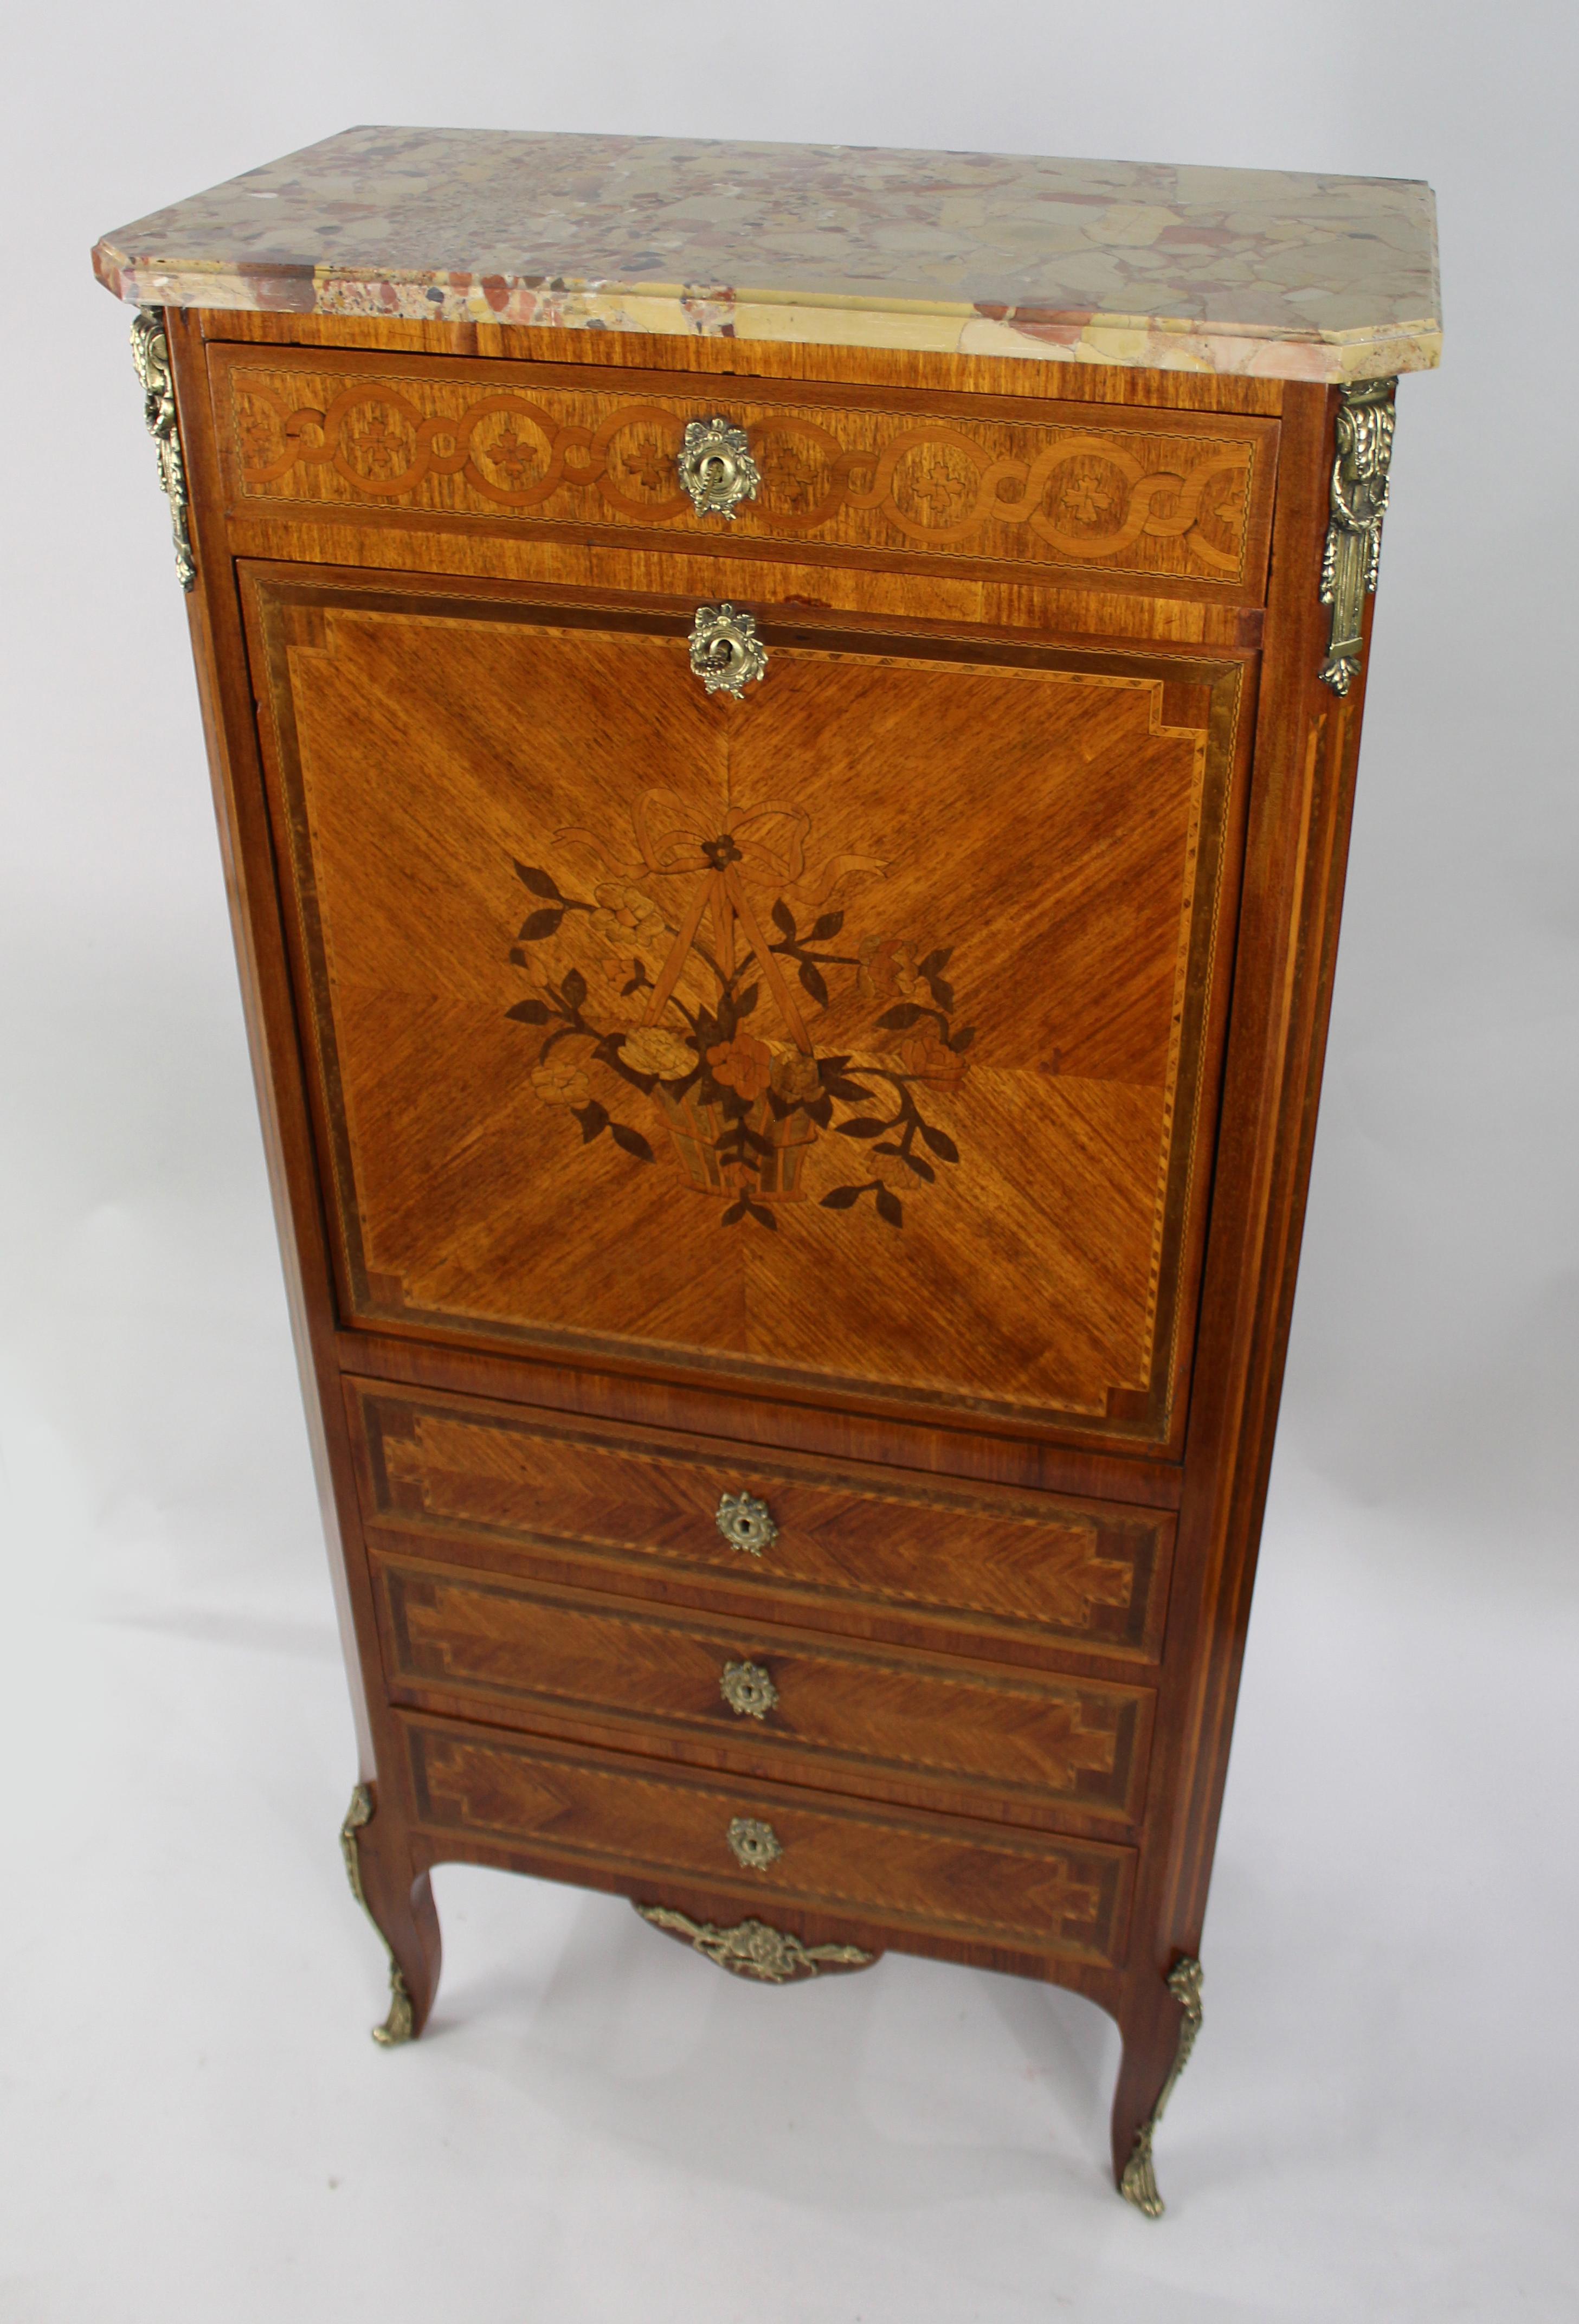 19th c. French marble topped Inlaid Escritoire


Original Breche d' Alep marble top. Upper drawer. Fall front opening to reveal leather writing surface. Shelf space and four drawers to the inside

Three further drawers to the lower body.

The